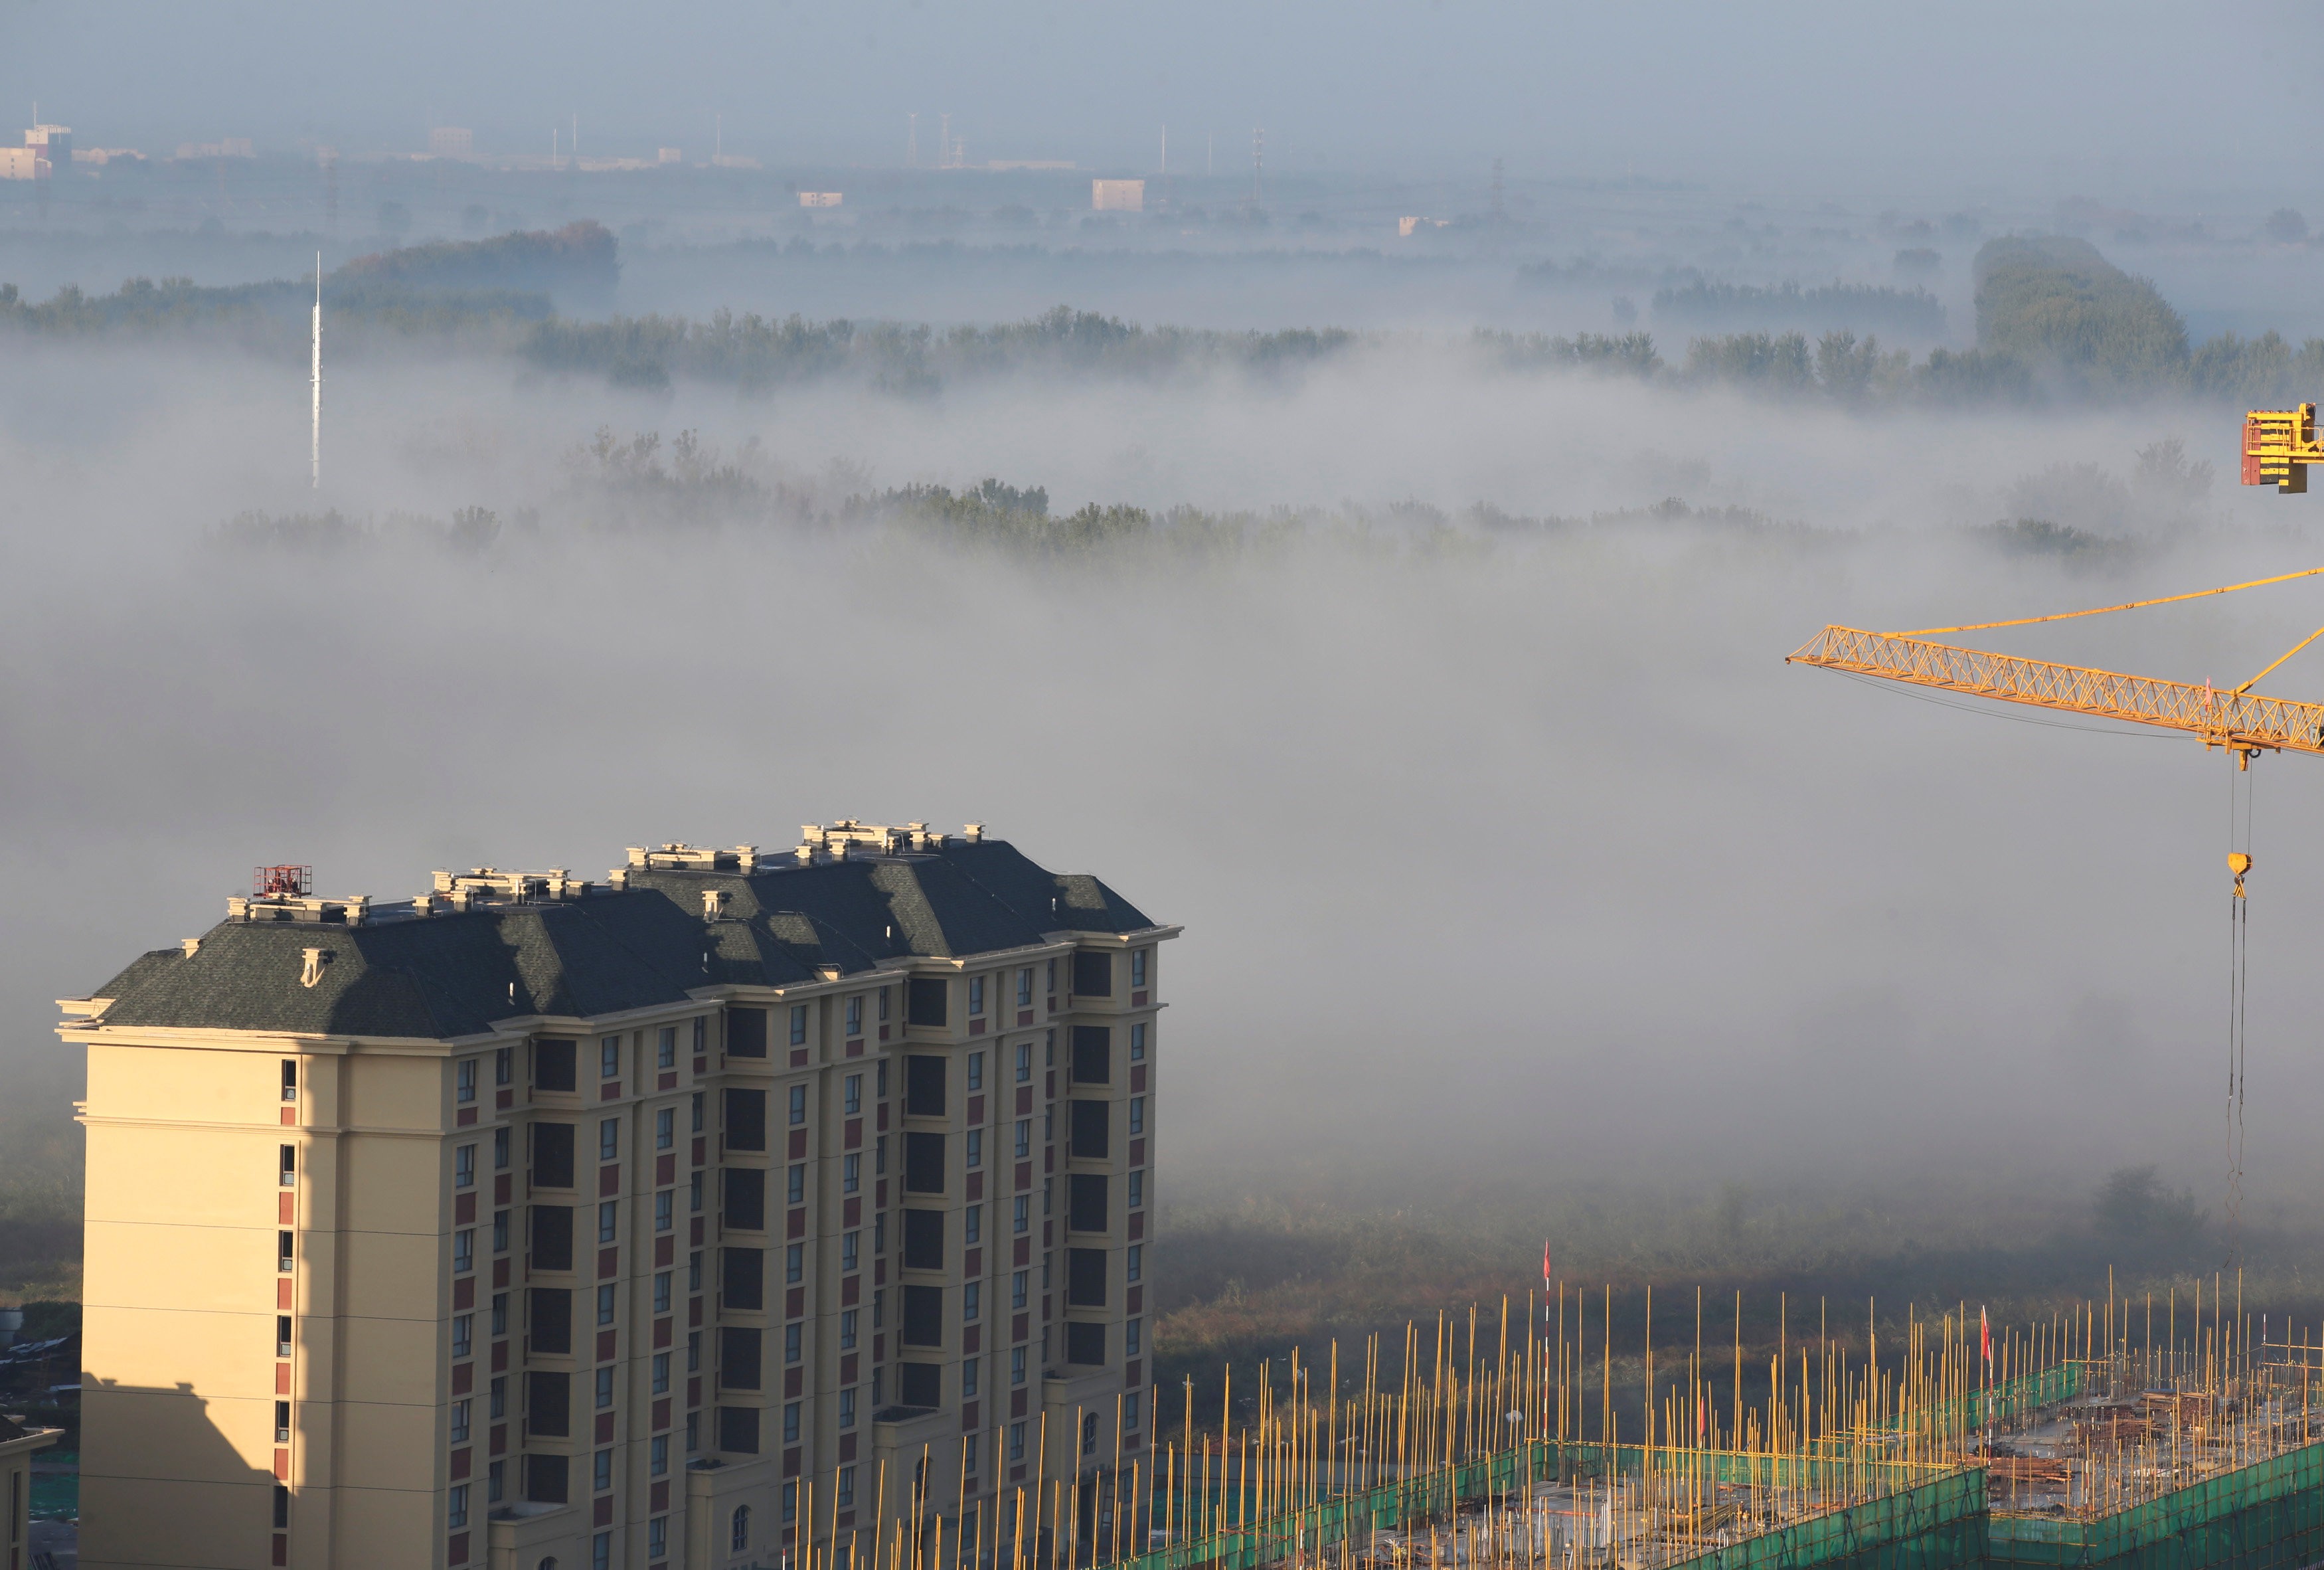 Blocks of flats being built on the outskirts of Tianjin. Photo: Reuters